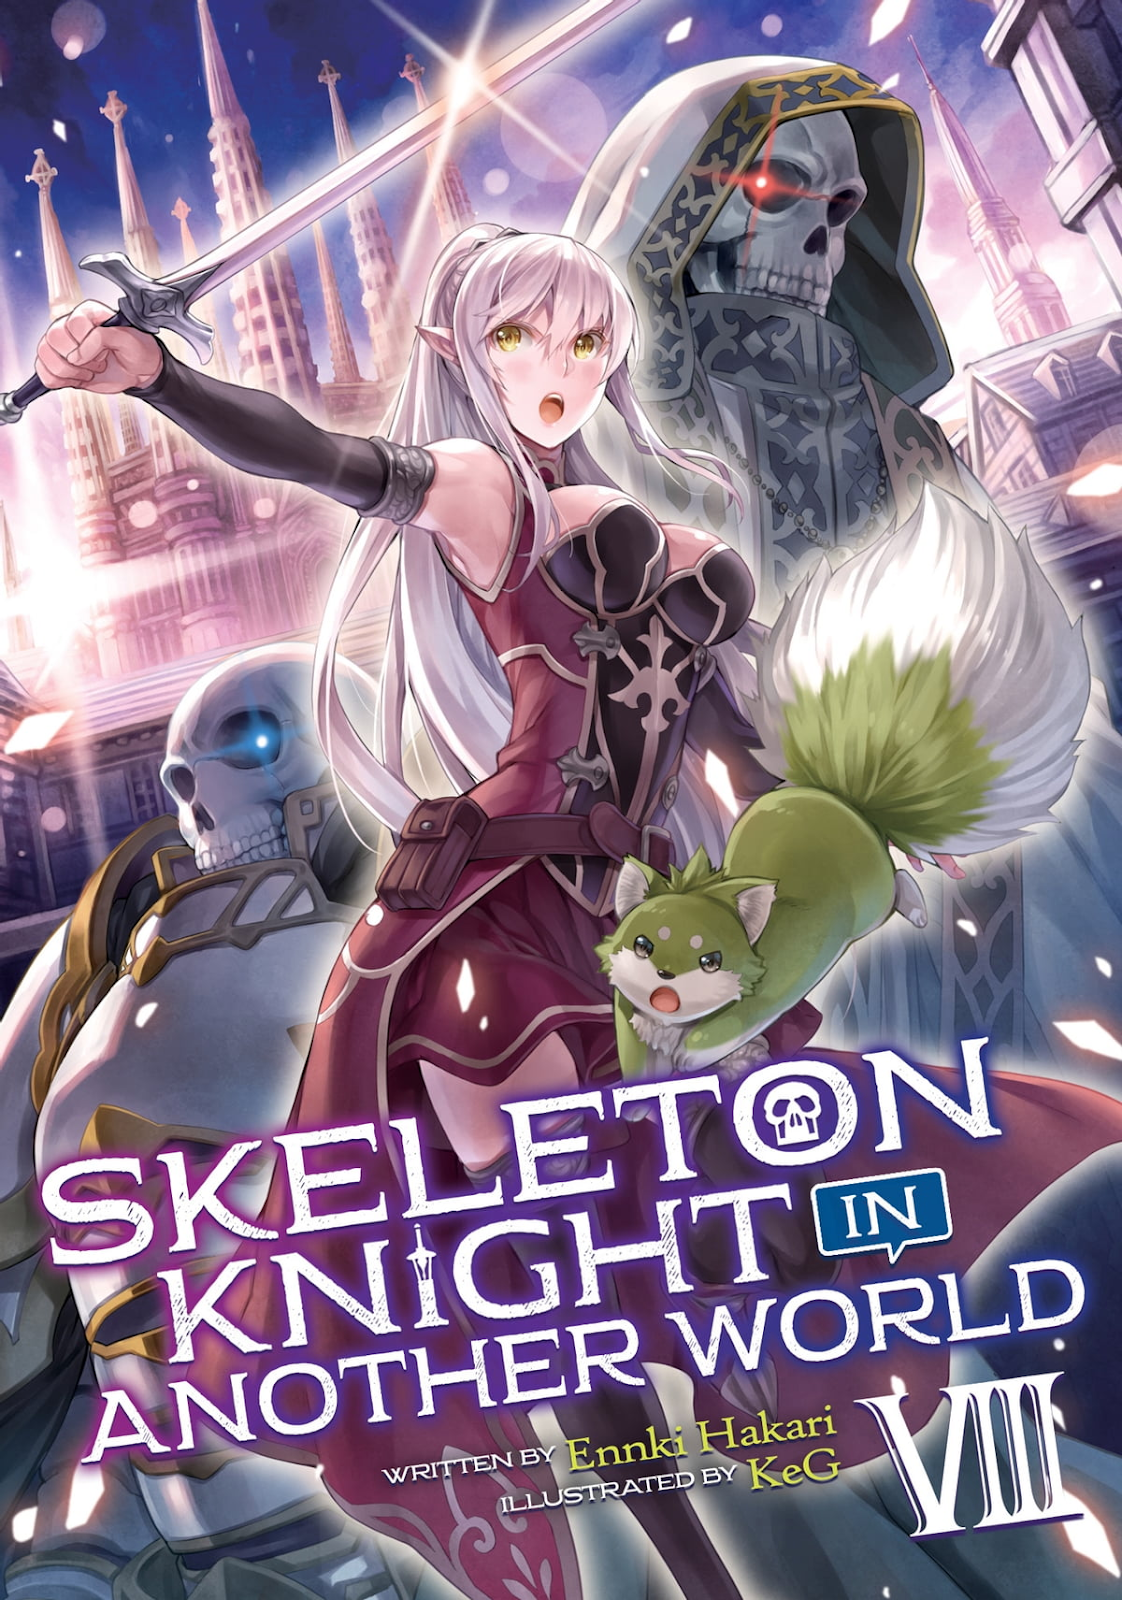 Skeleton Knight in Another World Anime Announced